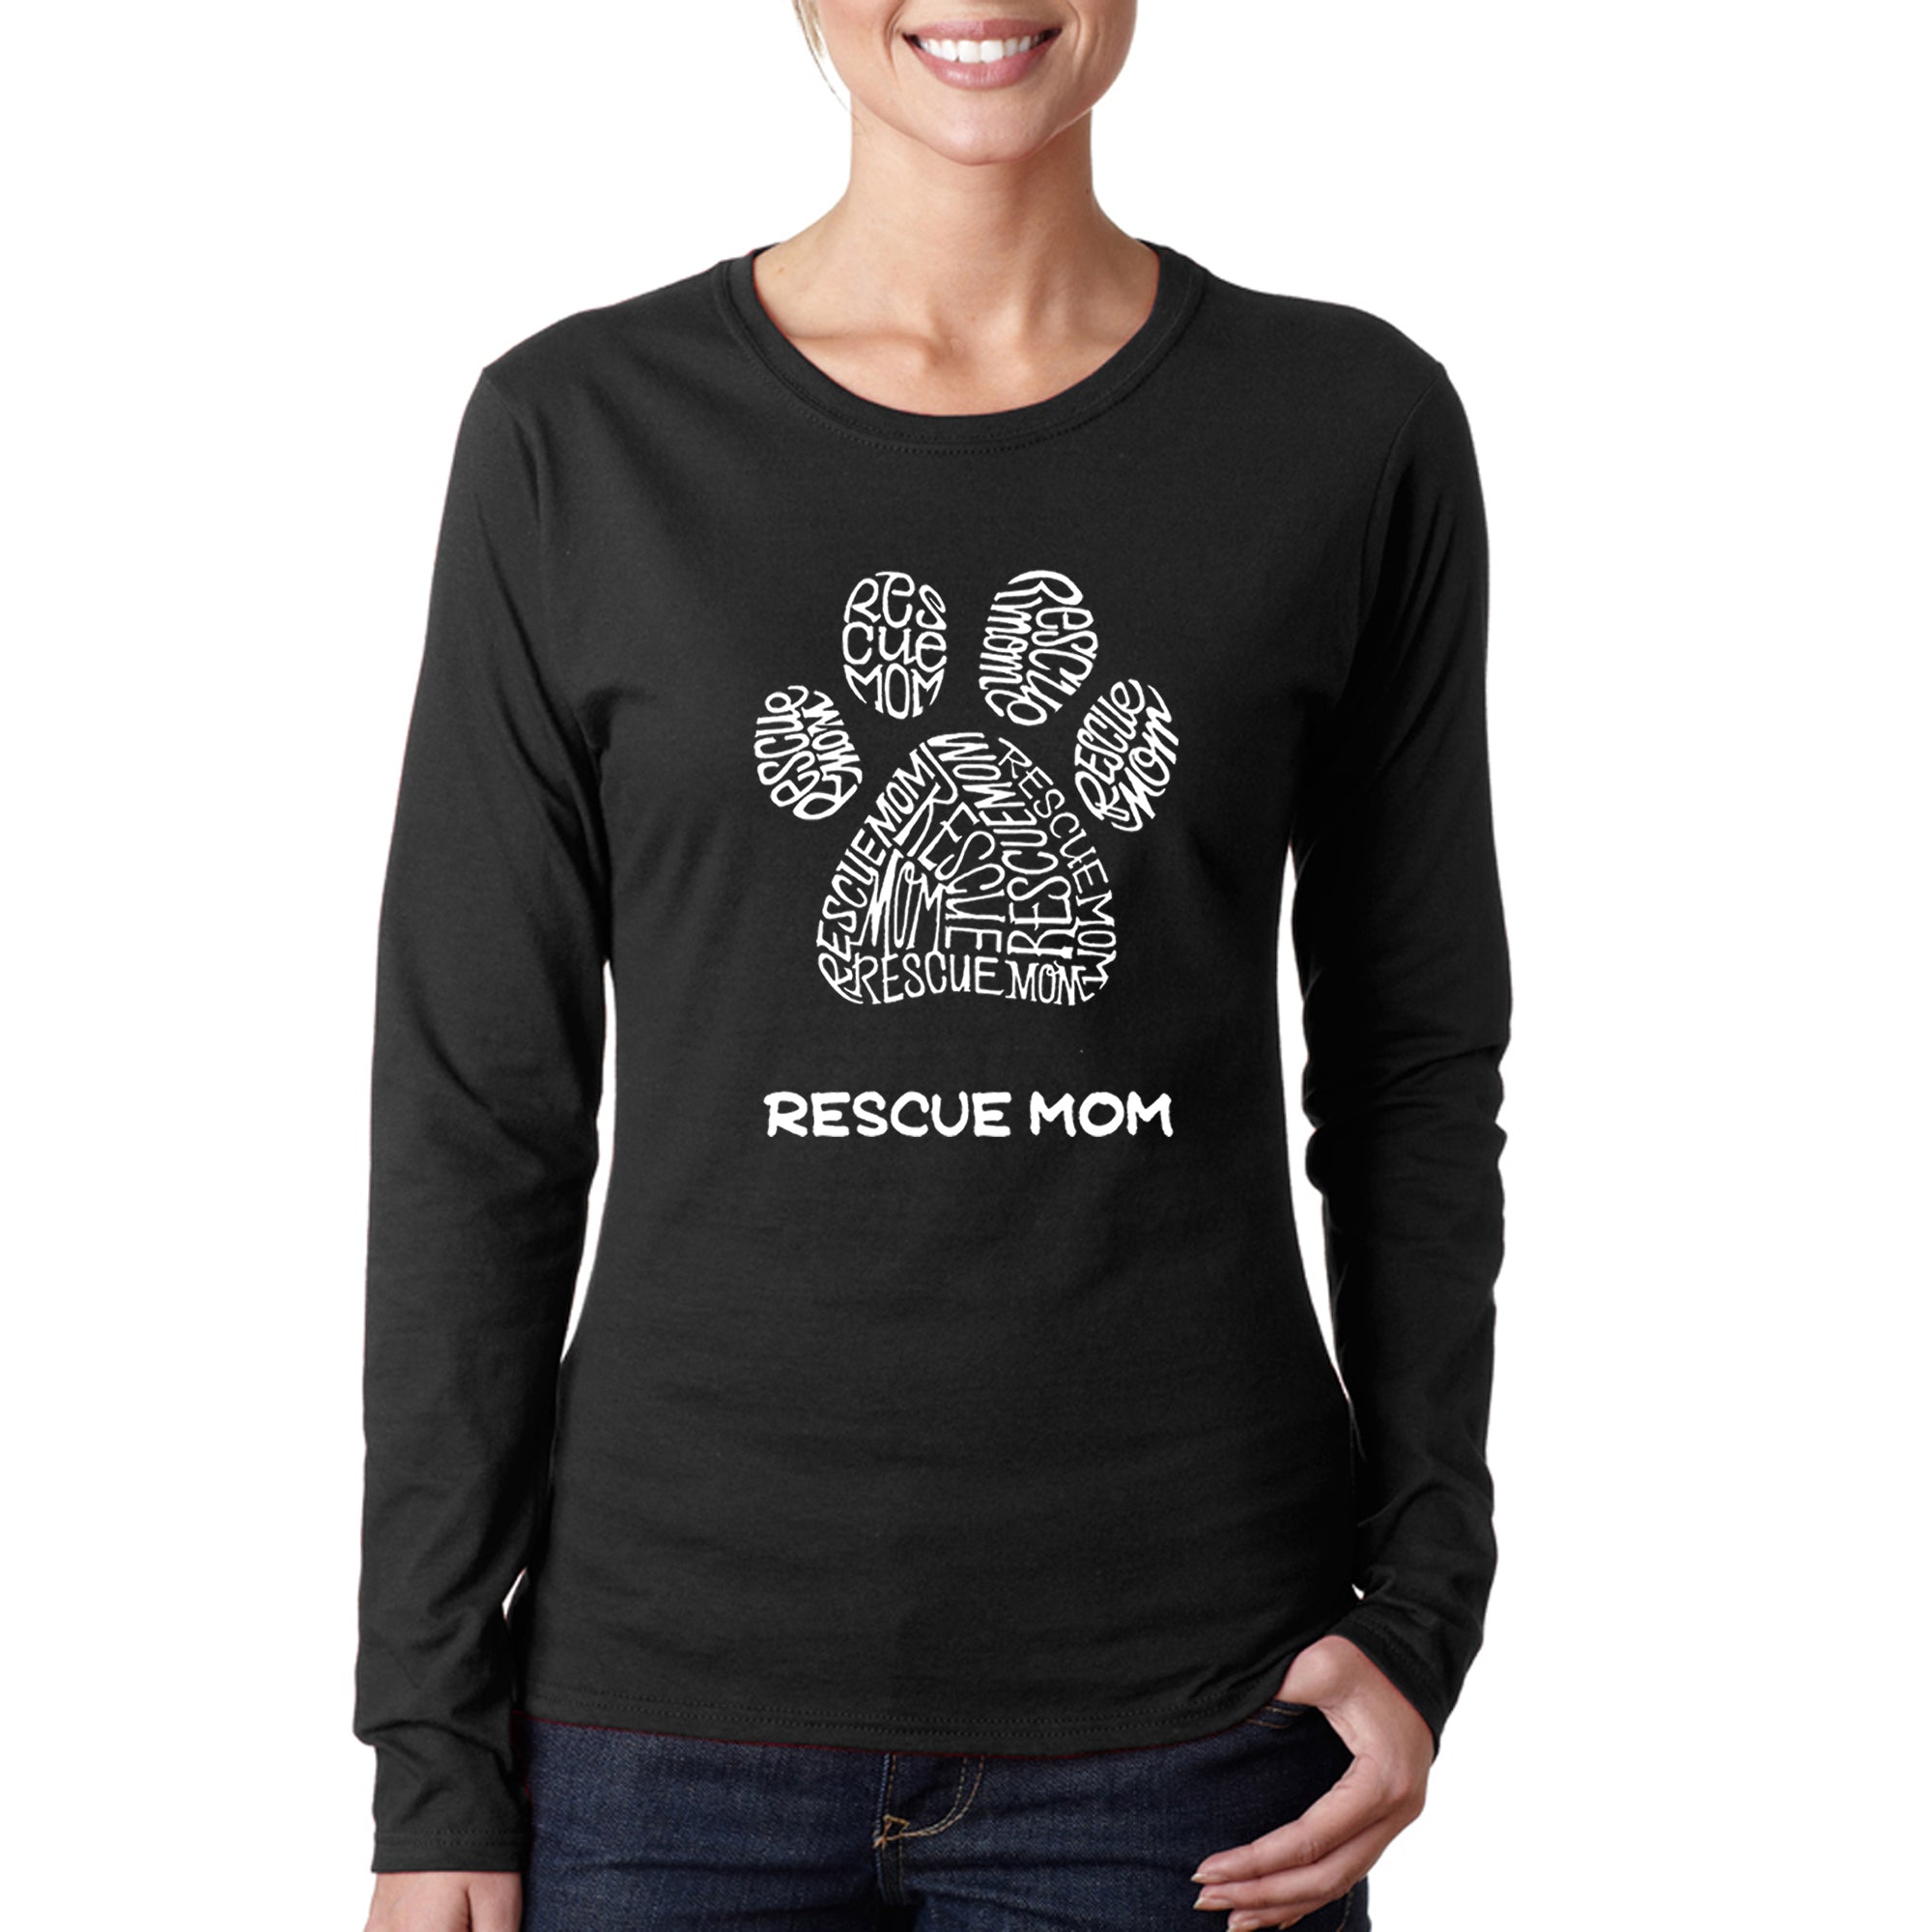 Rescue Mom - Women's Word Art Long Sleeve T-Shirt - Pink - Small